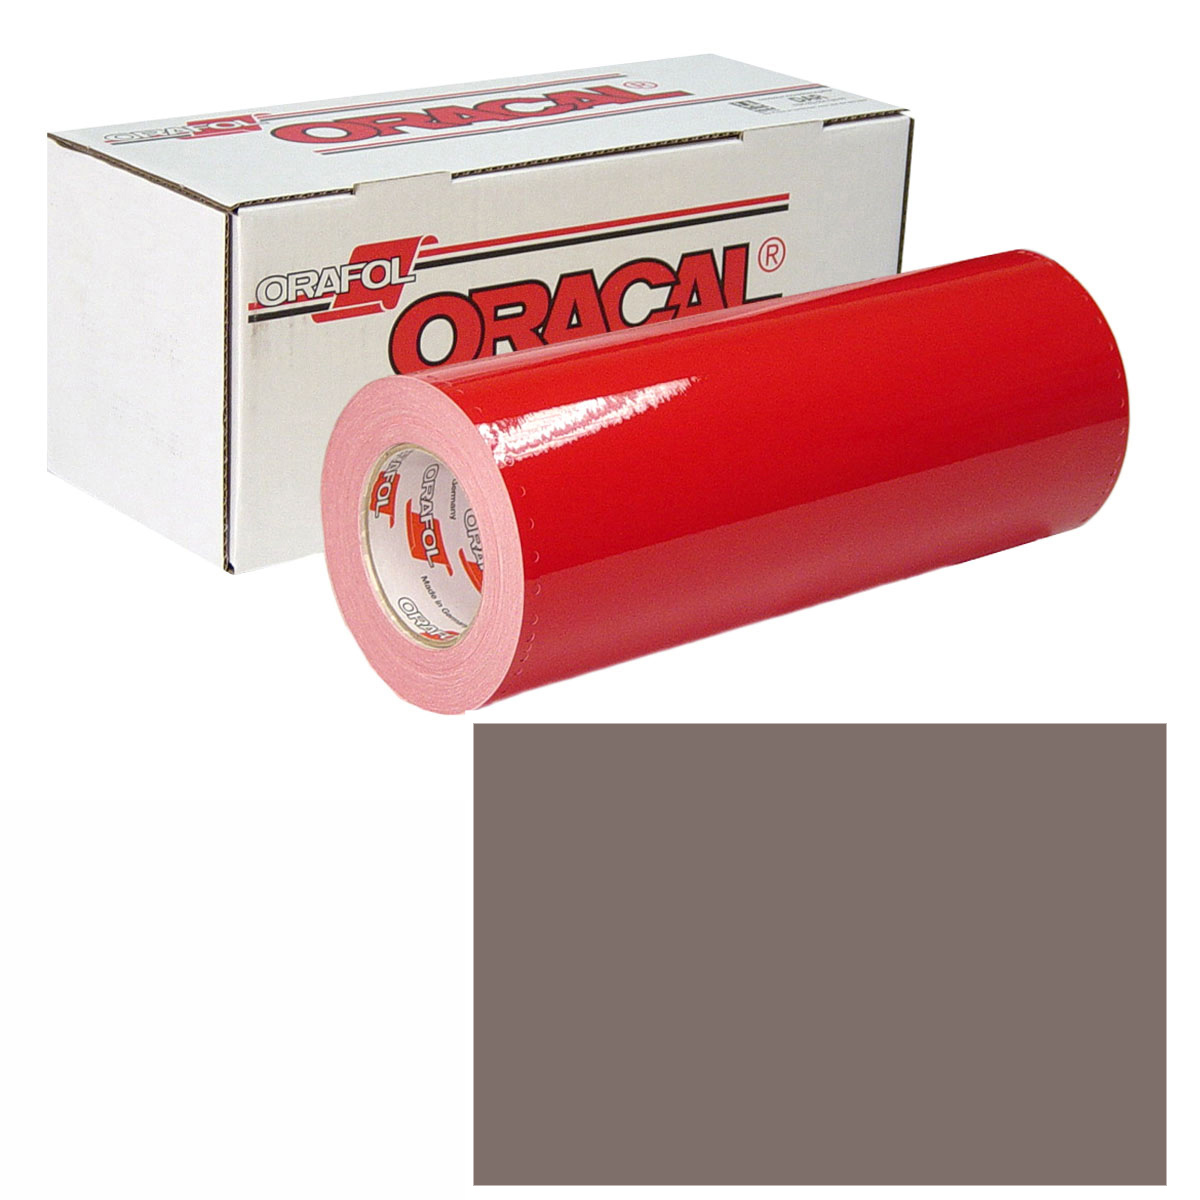 ORACAL 951 15in X 10yd 080 Brown